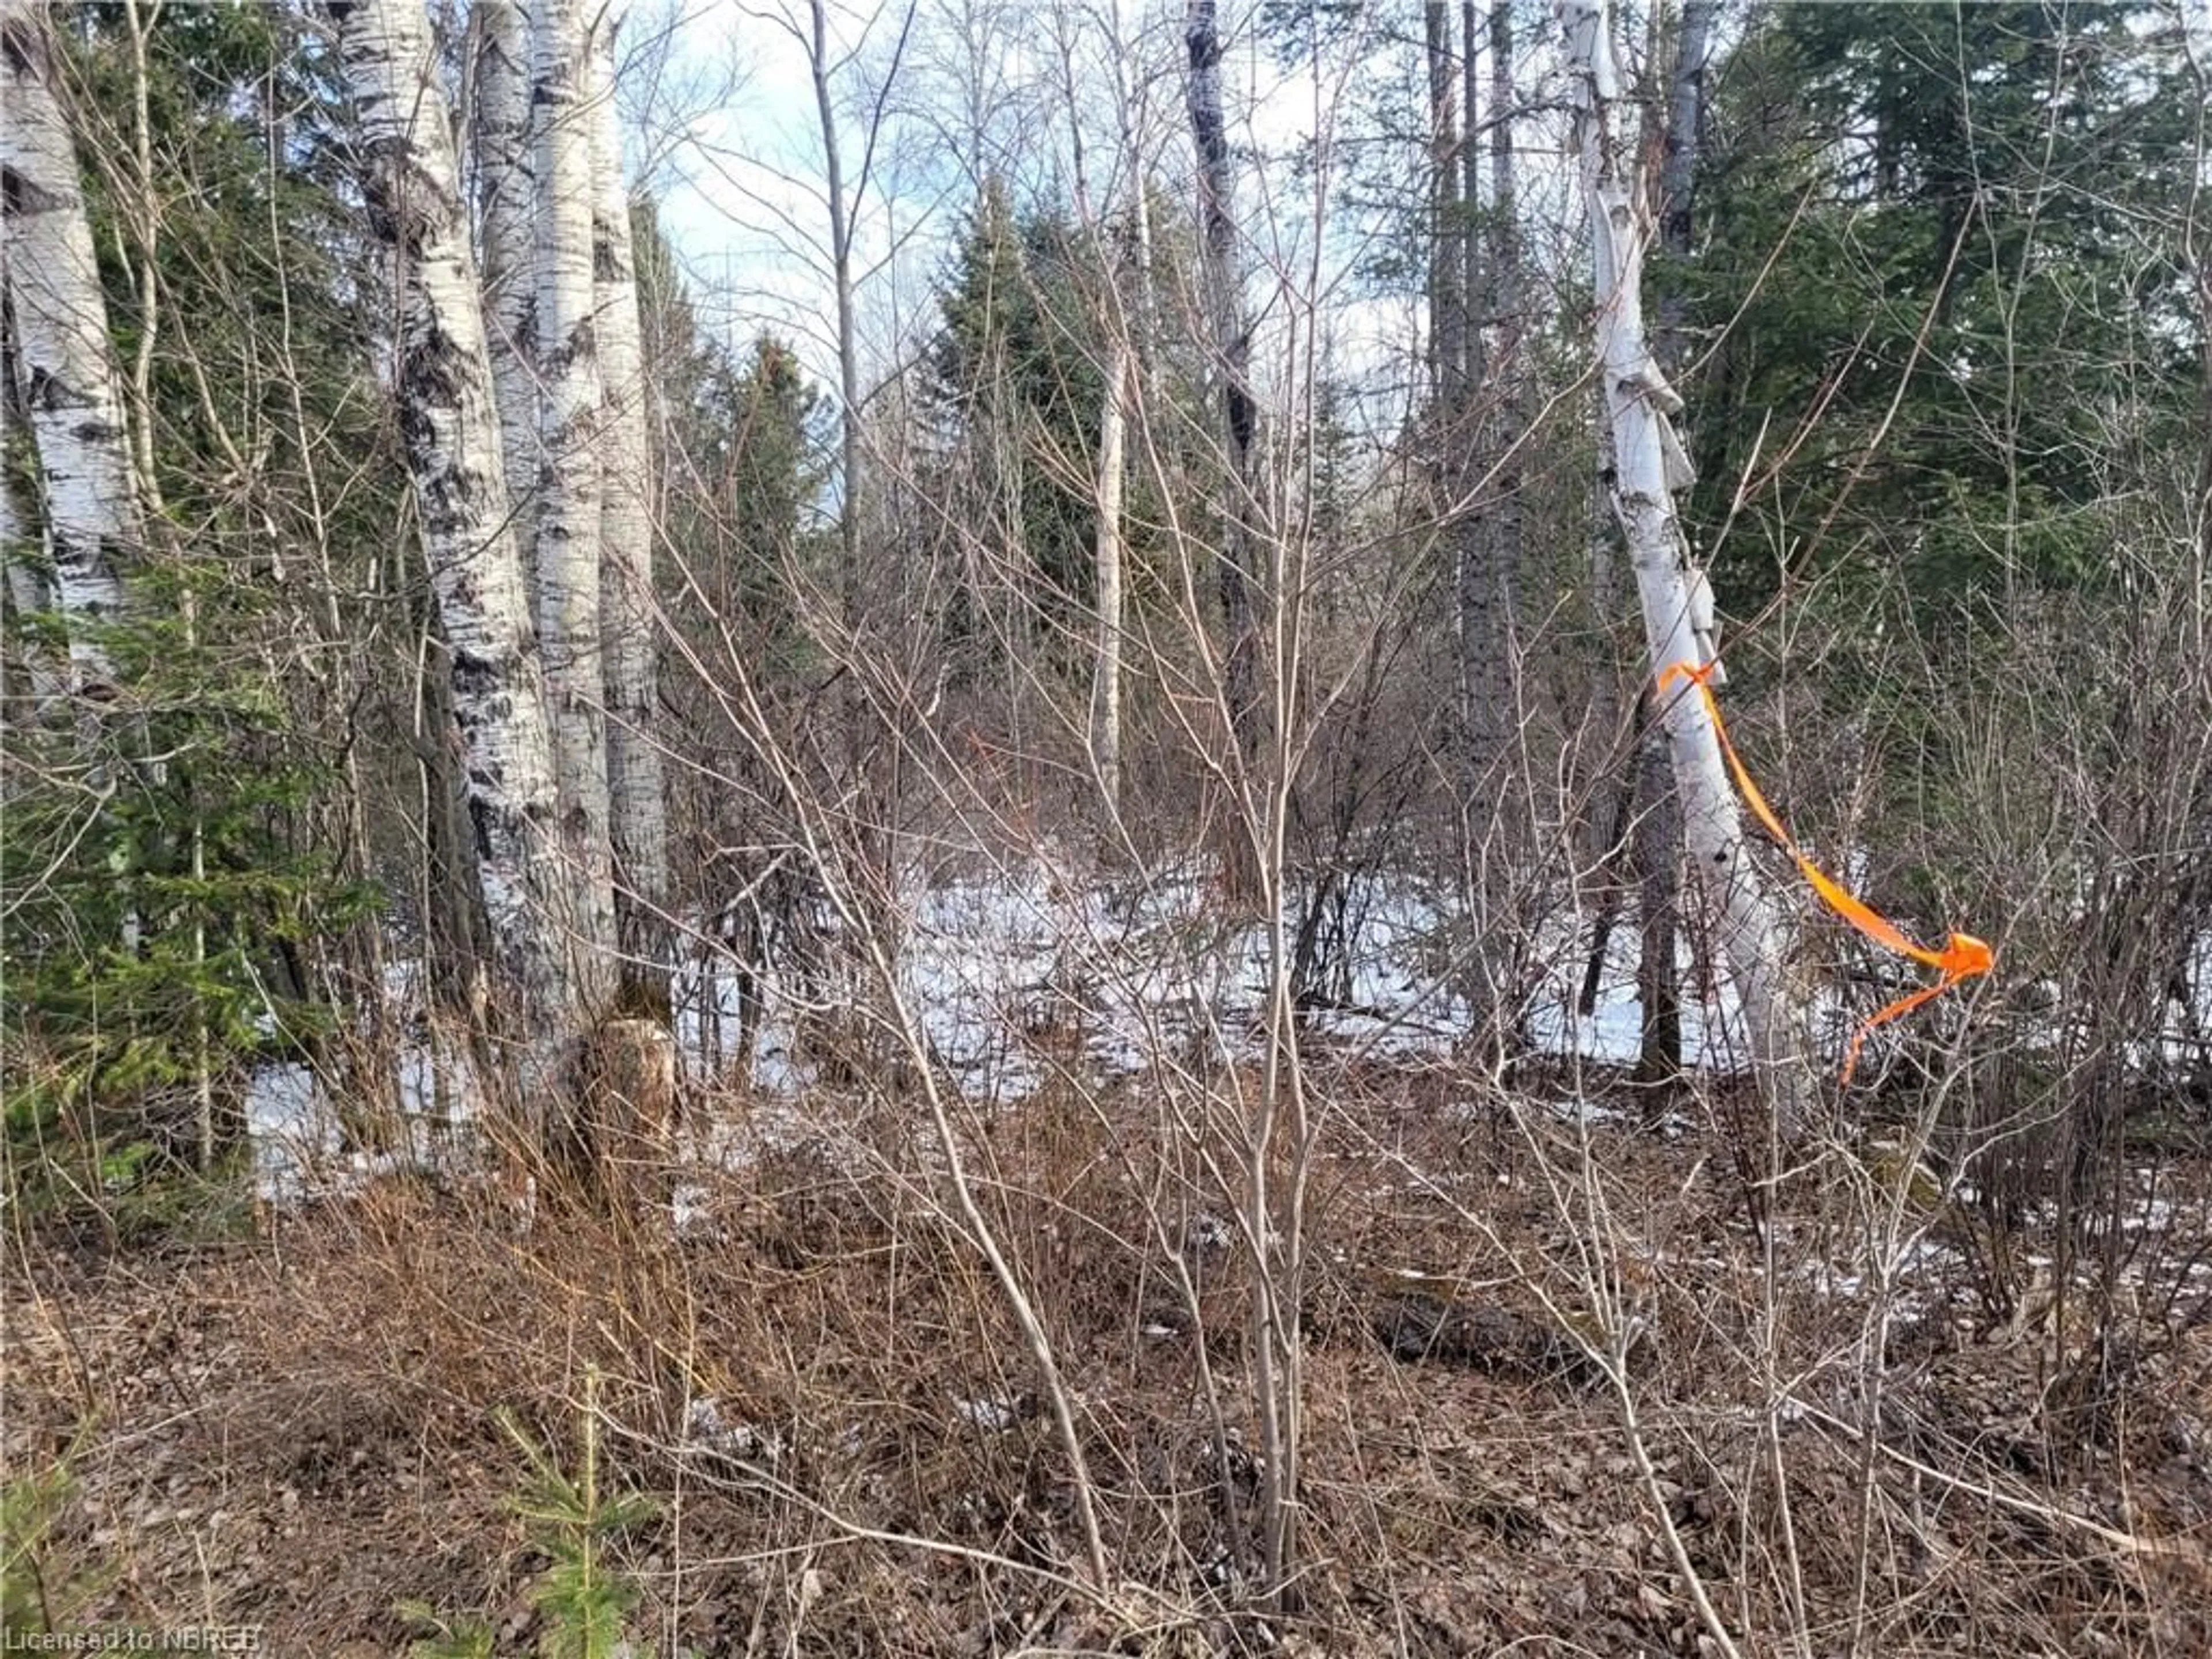 Home with unknown exterior material for LOT33 CON6 PART Hwy 533, Mattawa Ontario P0H 1V0